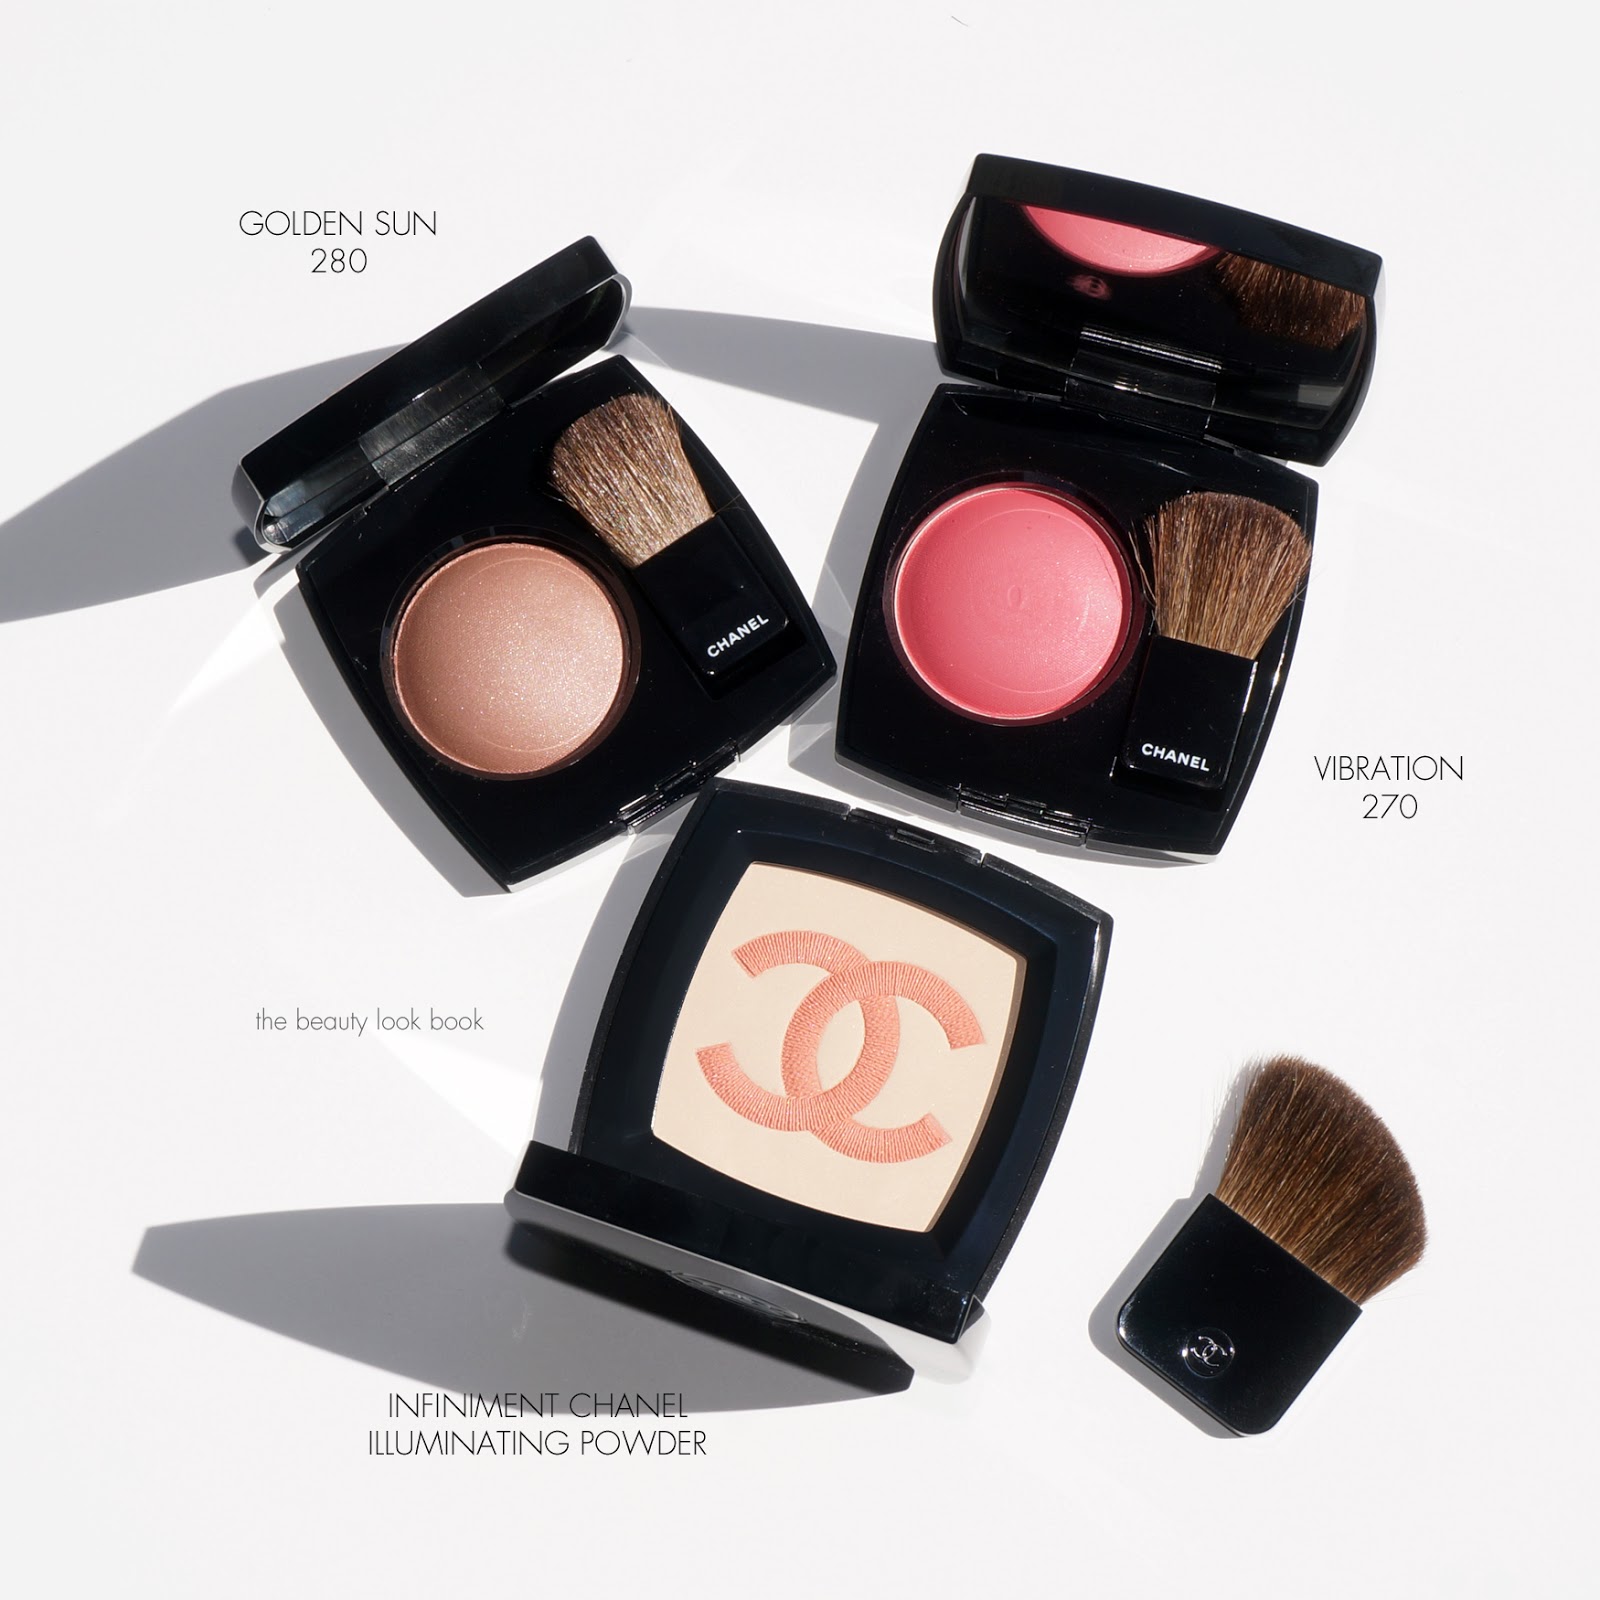 Chanel Harmony of Powders Premieres Fleurs Blush Discontinued Best  Highlighter